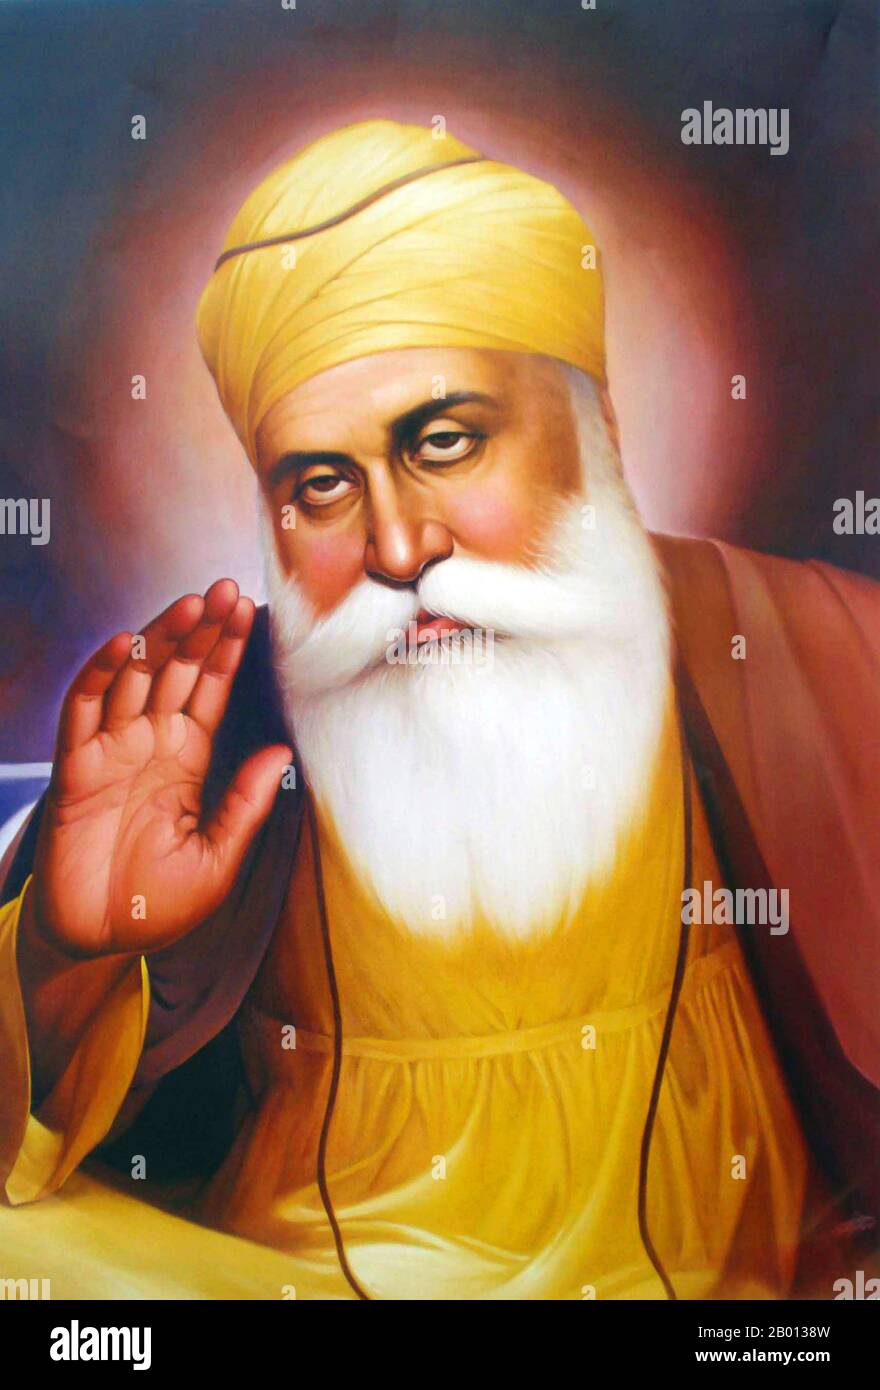 India: Guru Nanak Dev (15 April 1469 – 22 September 1539), the first of the ten Sikh Gurus (1469-1539).  Guru Nanak (1469-1539), also known as Baba Nanak, was the founder of the religion of Sikhism and the first of the ten Sikh Gurus. Sikhs believe that all subsequent Gurus possessed Guru Nanak’s divinity and religious authority. He is said to have traveled far and wide across Asia, teaching the message of 'ik onkar' ('one God'), the 'Eternal Truth'. Stock Photo